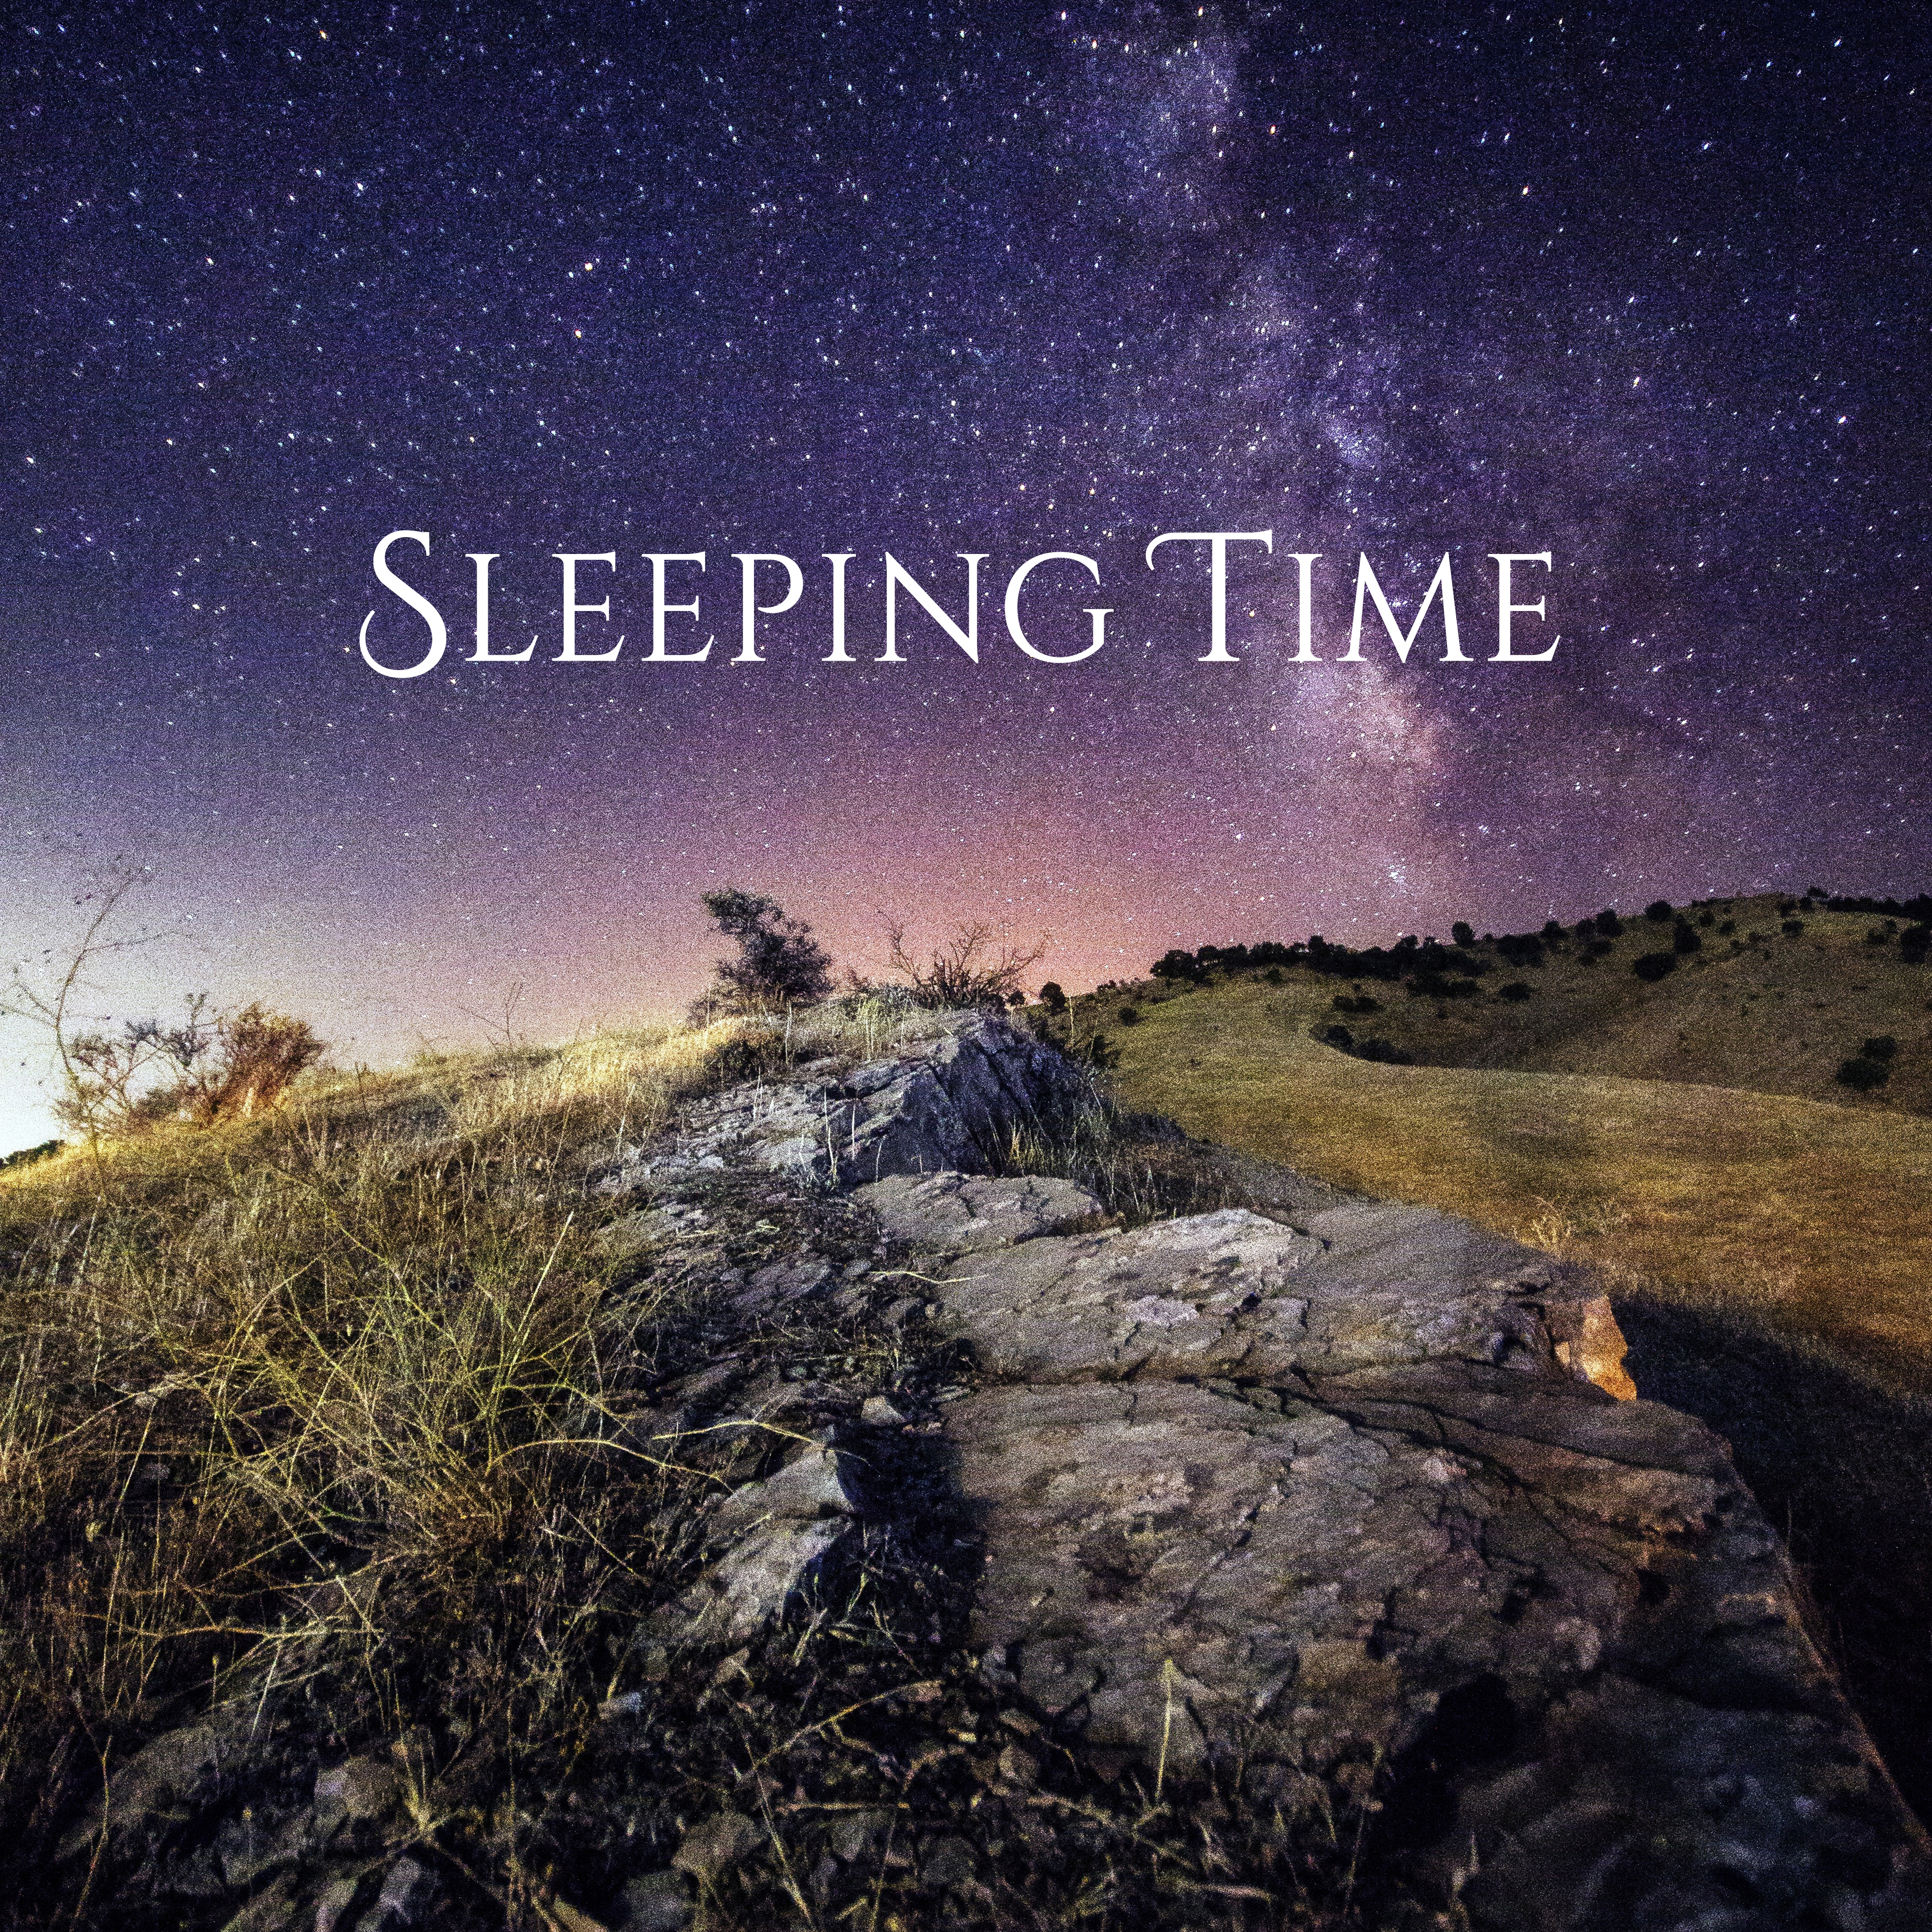 Sleeping Time – Soothing Music to Bed, Relaxation, Restful Sleep, Calming Melodies at Night, Pure Rest